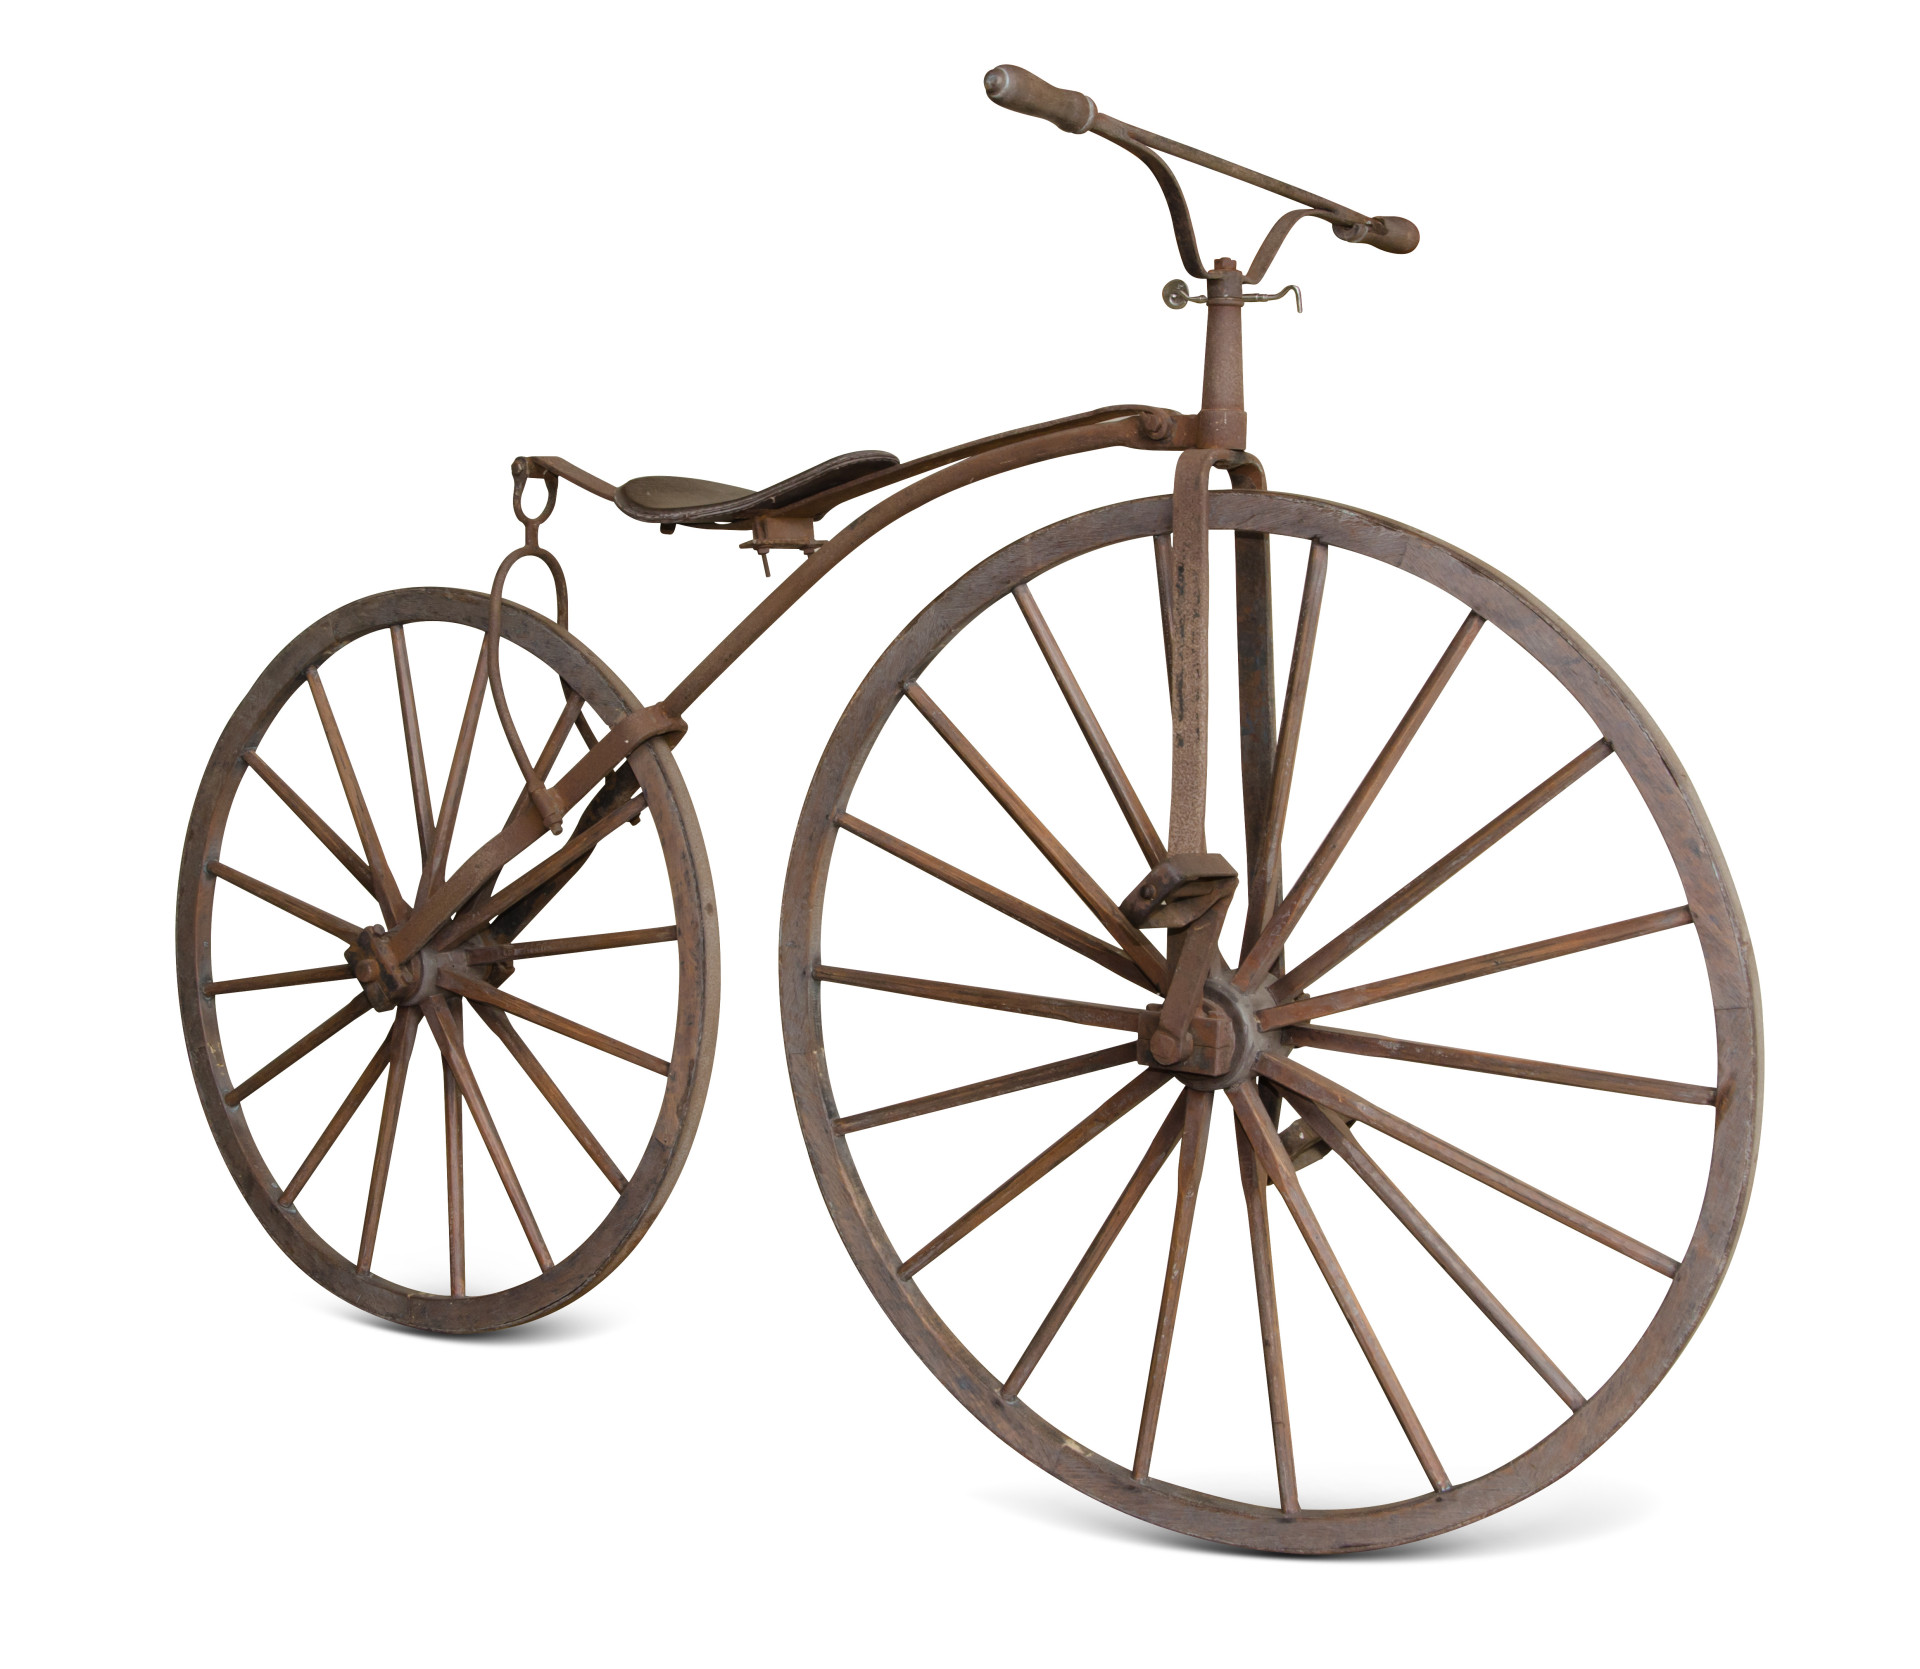 The first <a href="https://uk.starsinsider.com/celebrity/285953/celebrities-who-cycle-saving-the-world-one-pedal-at-a-time" rel="noopener">bicycles</a> were made of wood. The "célérifère" was one of the first velocipedes to be produced in Europe in the 18th century.<p>You may also like:<a href="https://www.starsinsider.com/n/267781?utm_source=msn.com&utm_medium=display&utm_campaign=referral_description&utm_content=354515v5en-en"> All the times the British royal family turned up in unexpected places</a></p>